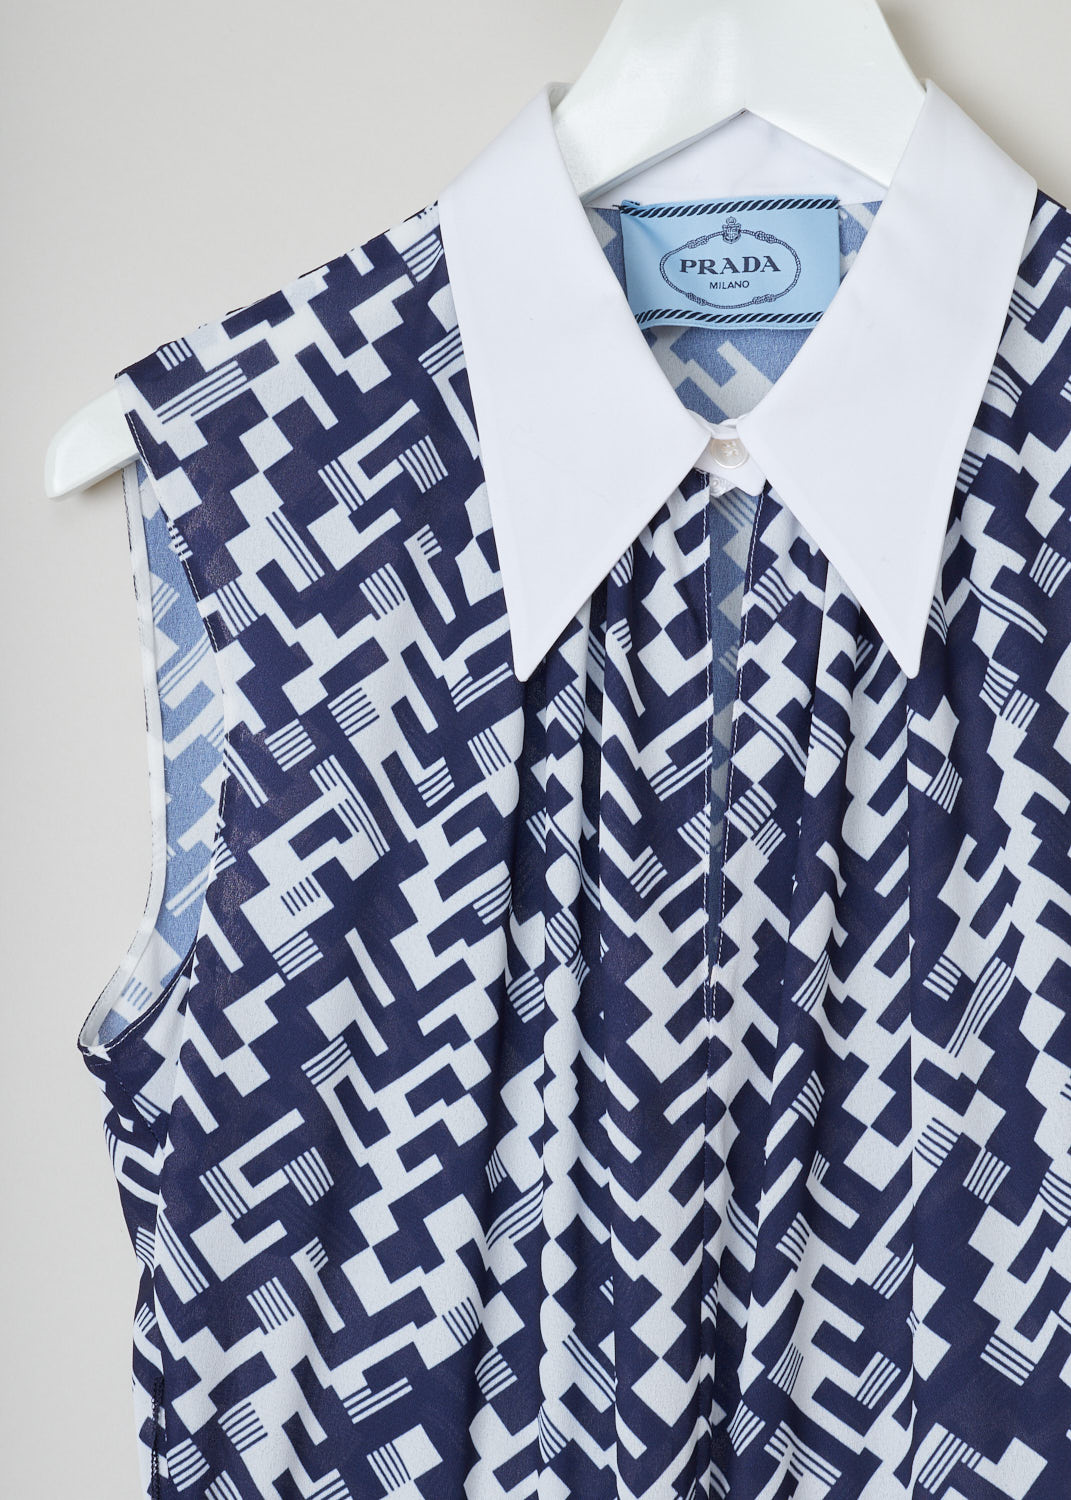 Prada, Geometric print blouse dress in blue and white, sable_leg_patte_P3A91H_F0PLR_baltico_bianco, blue white, detail, Sleeveless model featuring a pointed collar and two belt loops on the sides with a black velvet belt decorated with two ivory colored buttons. Going further down the skirt has accordion pleats and the concealed zipper is on the side. 